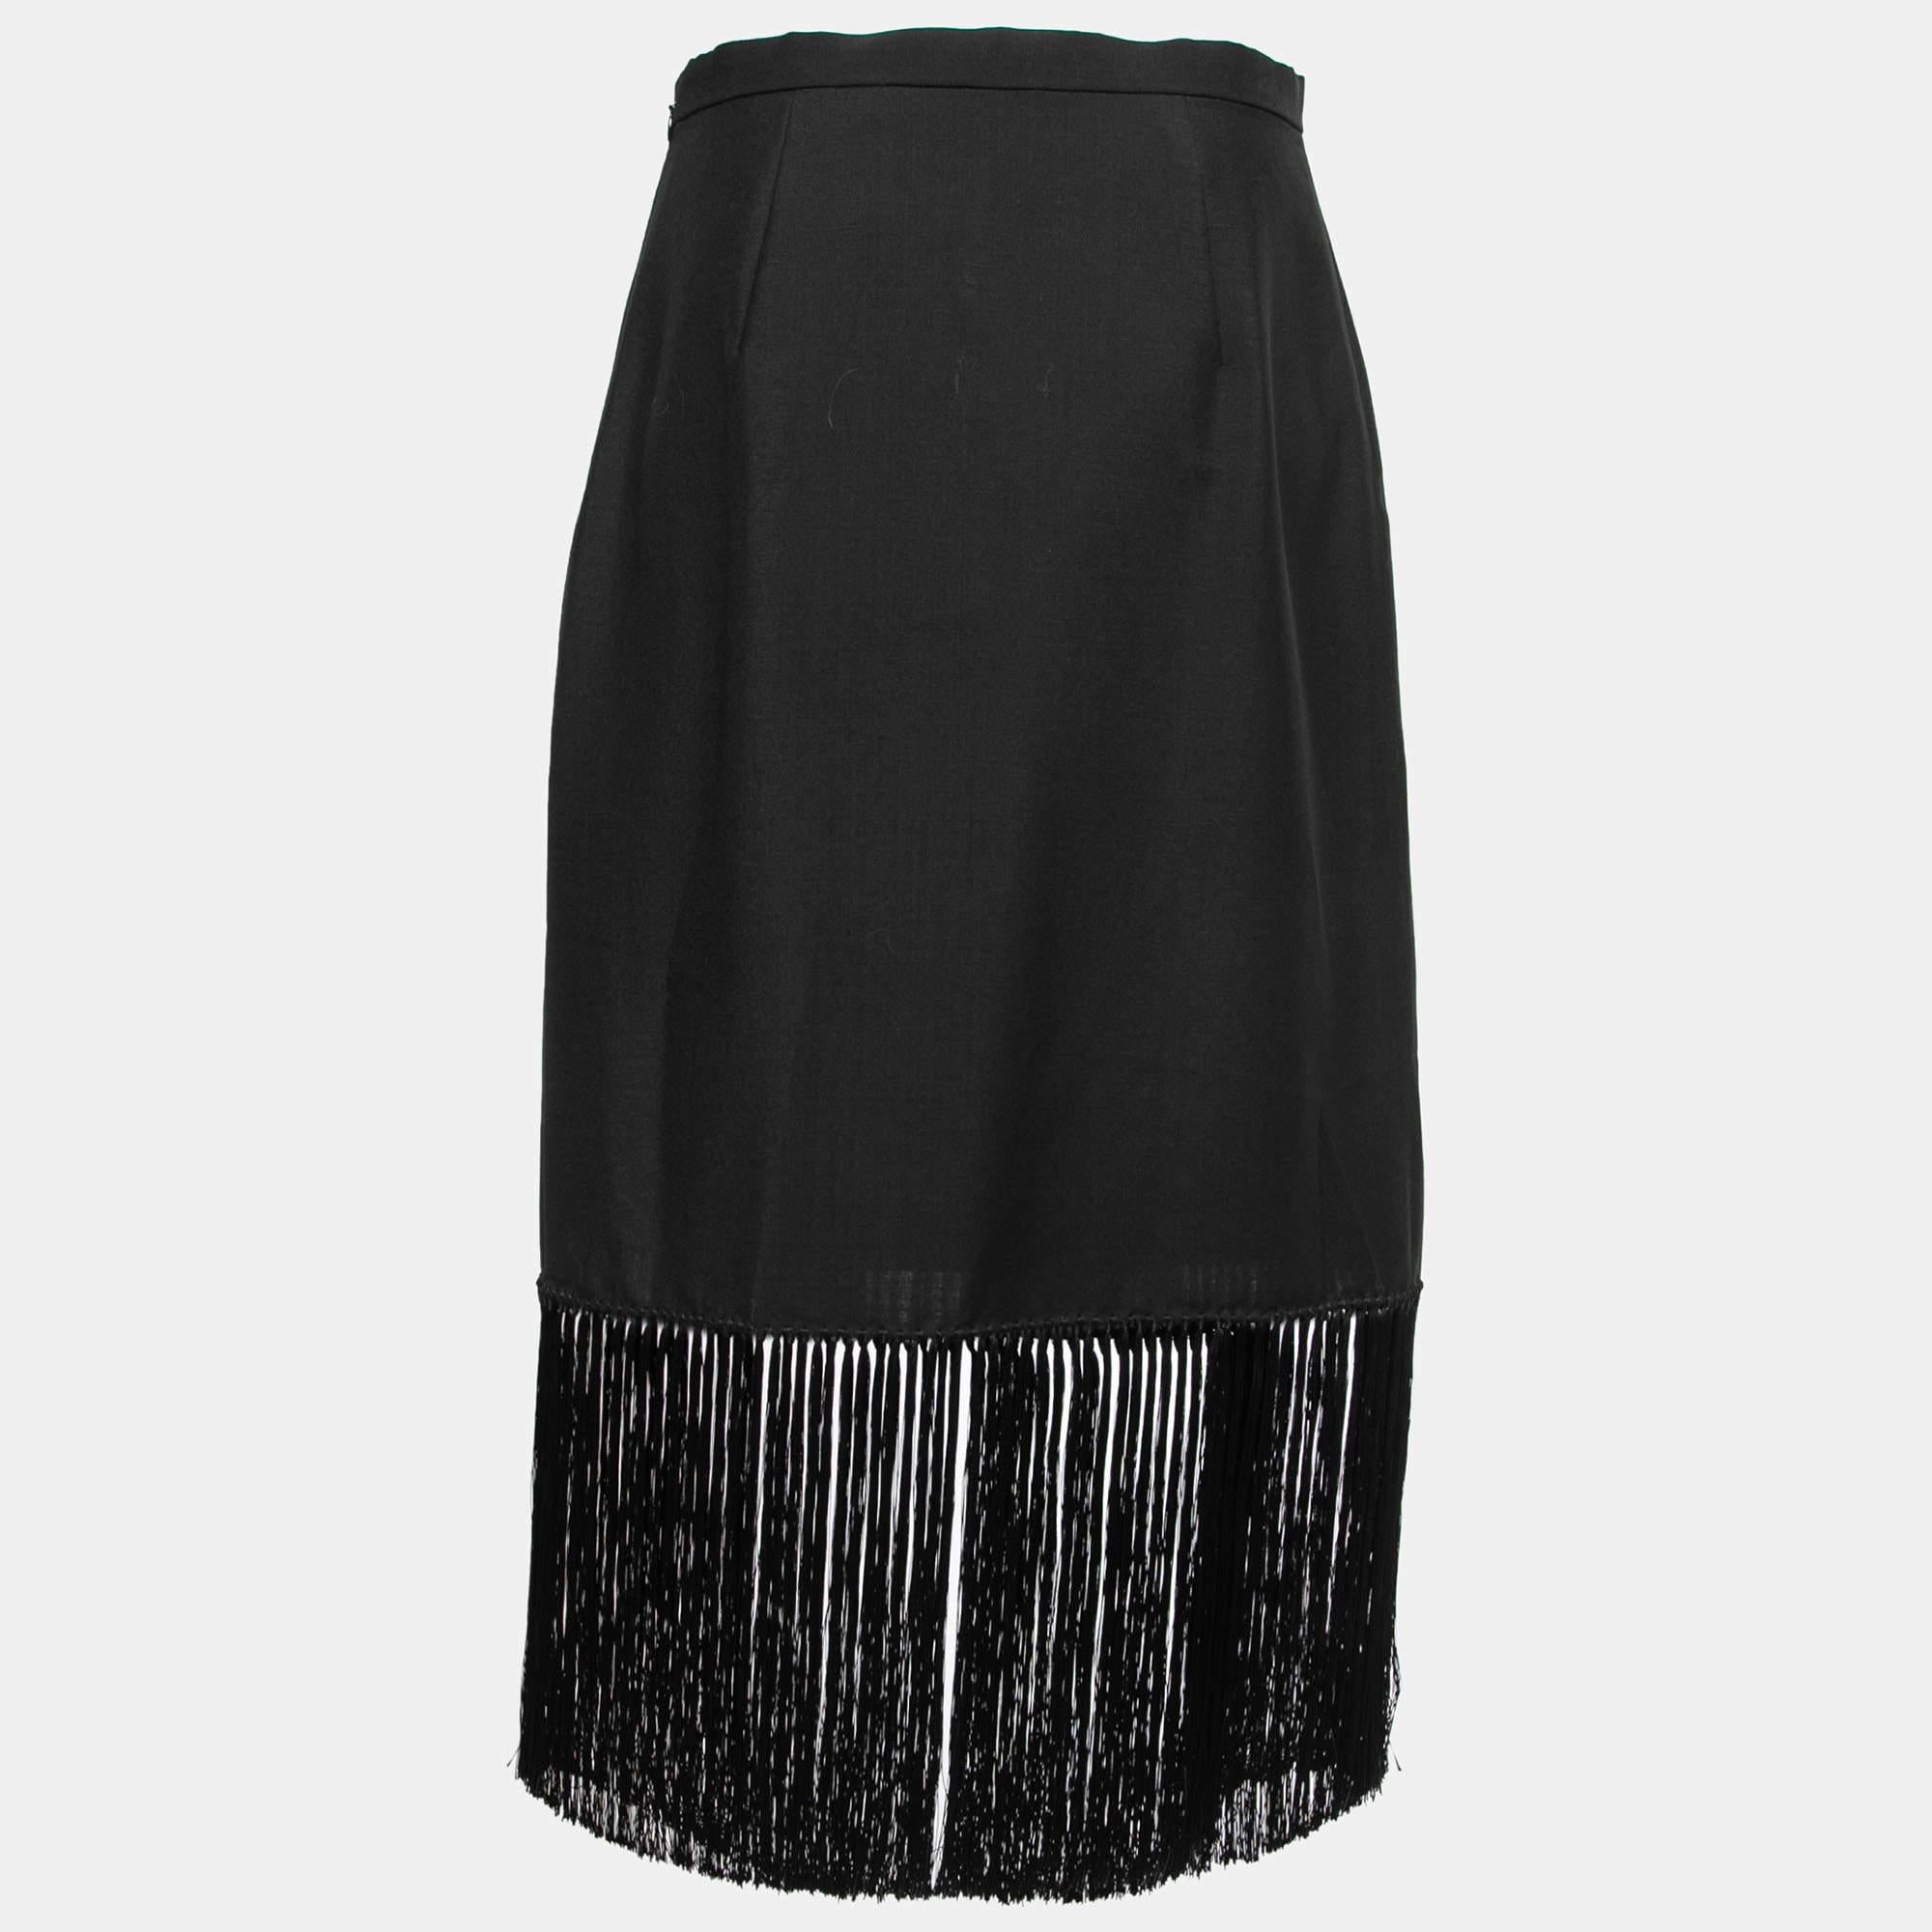 Experience the charm of designer clothing with this gorgeous Burberry skirt. Made from quality fabrics, the skirt has a simple allure and a great fit. Pair it up with a tailored blouse or a simple top and high heels.

Includes: Price Tag